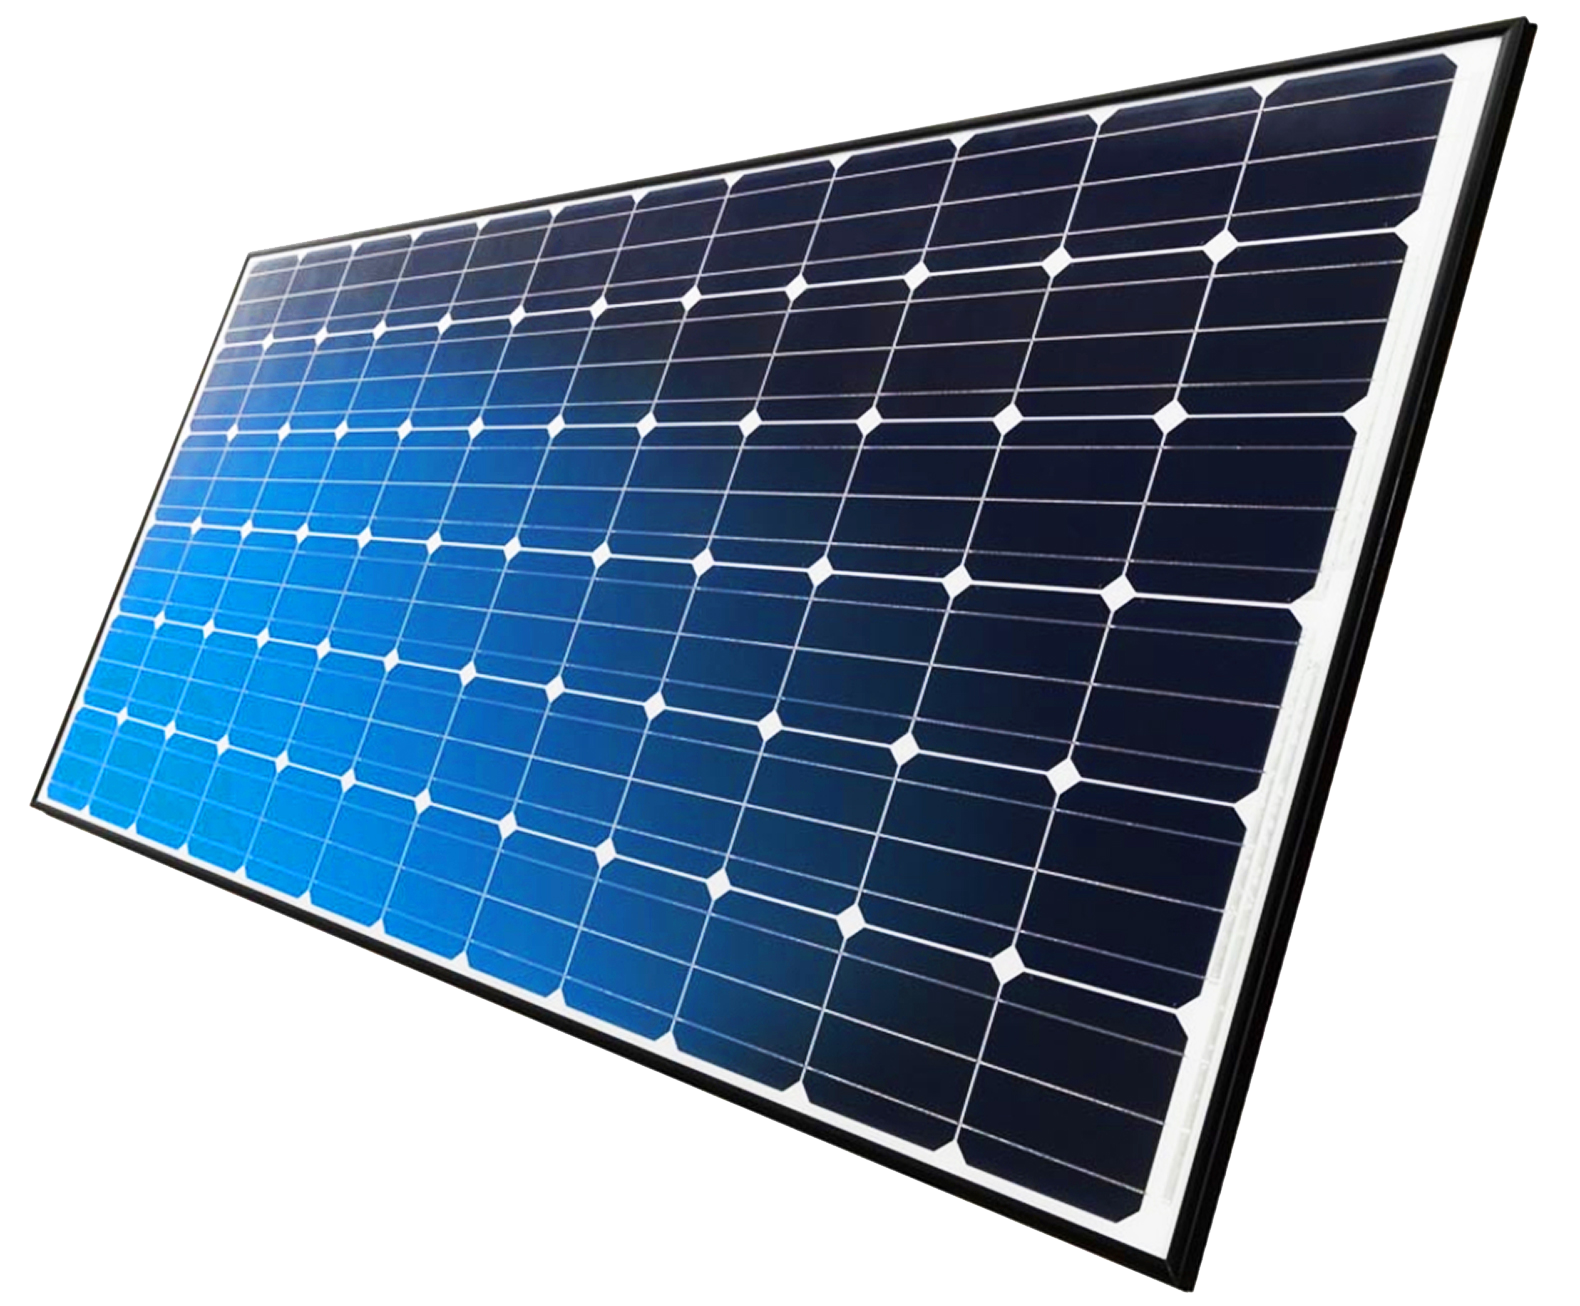 Solar Panel capable of providing power to typical industrial monitoring and control systems